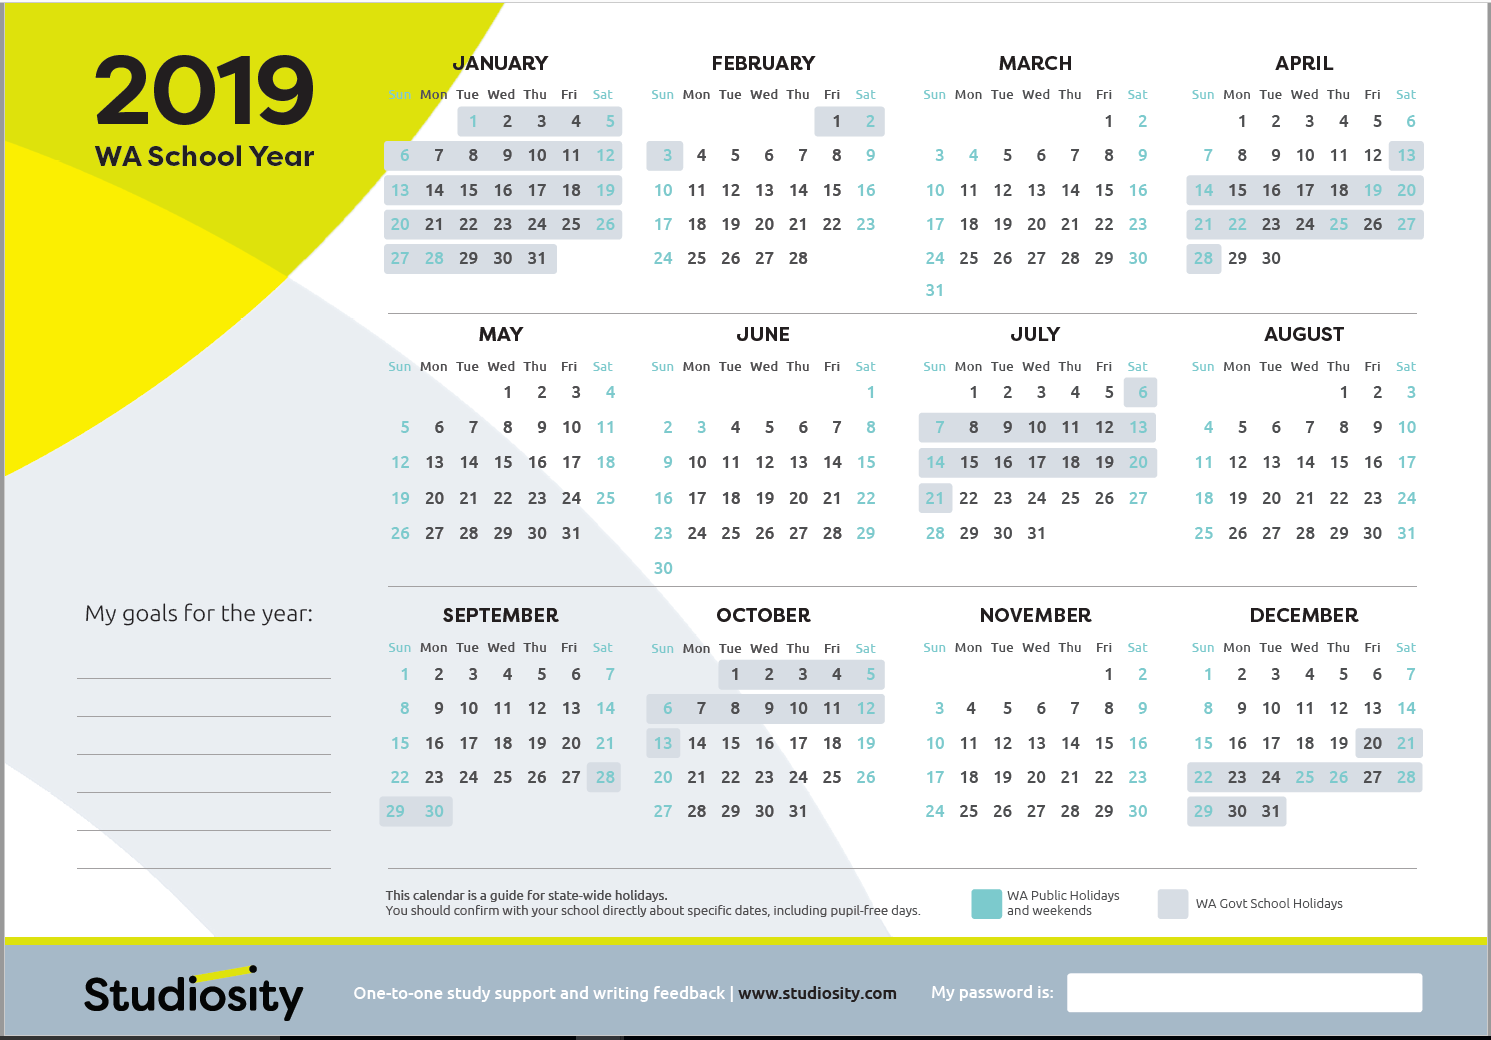 School terms and public holiday dates for WA in 2019 Studiosity